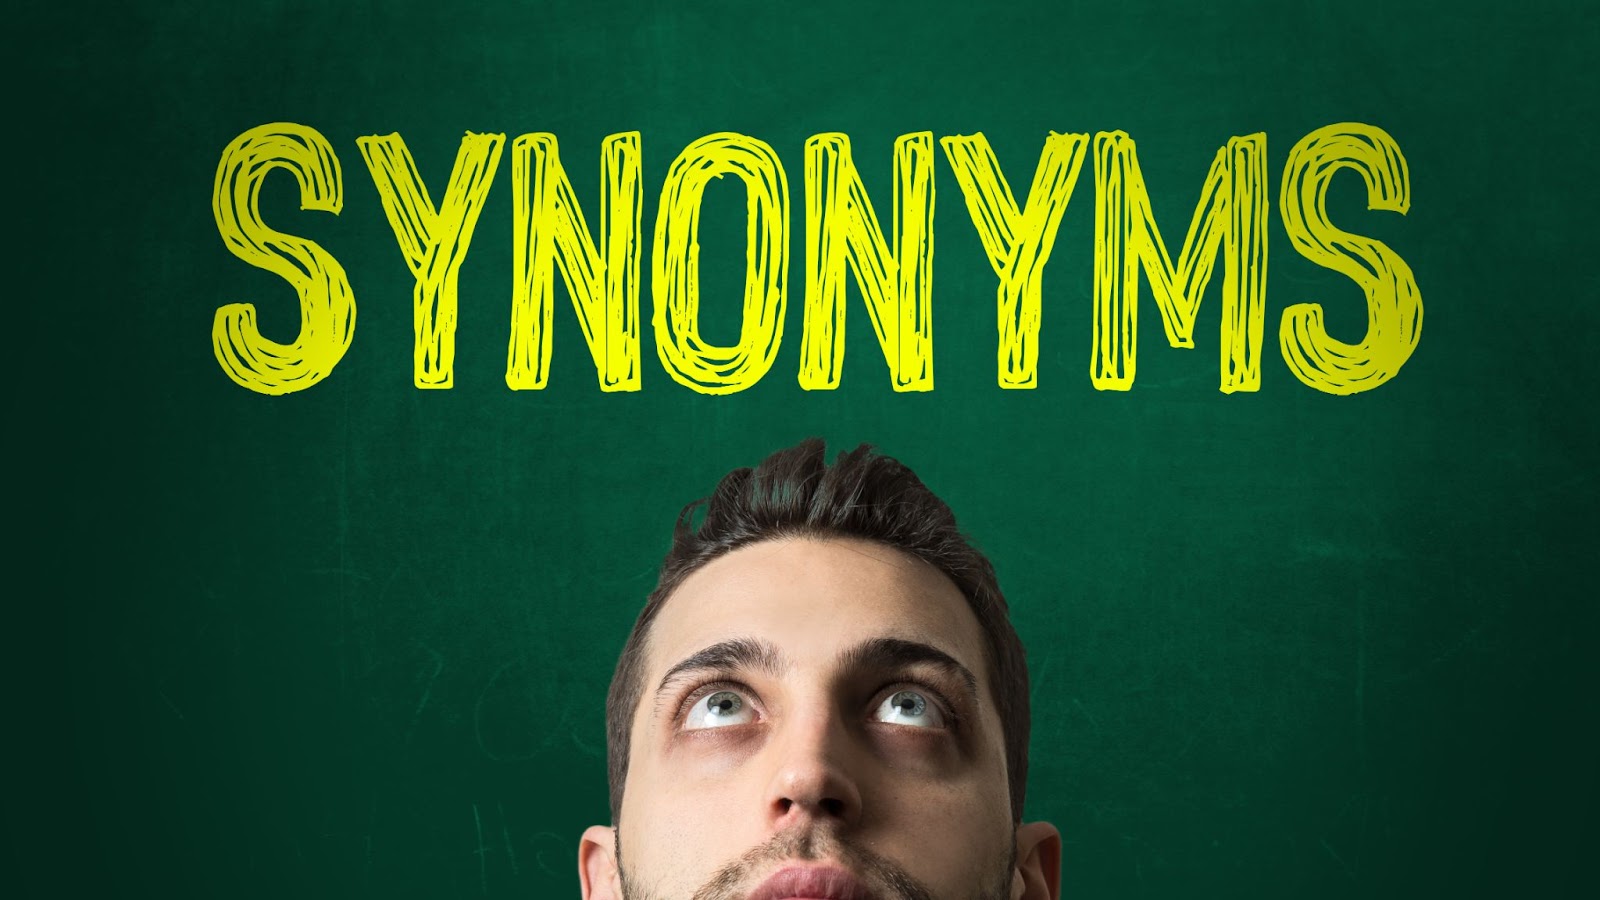 25 Synonyms for Written